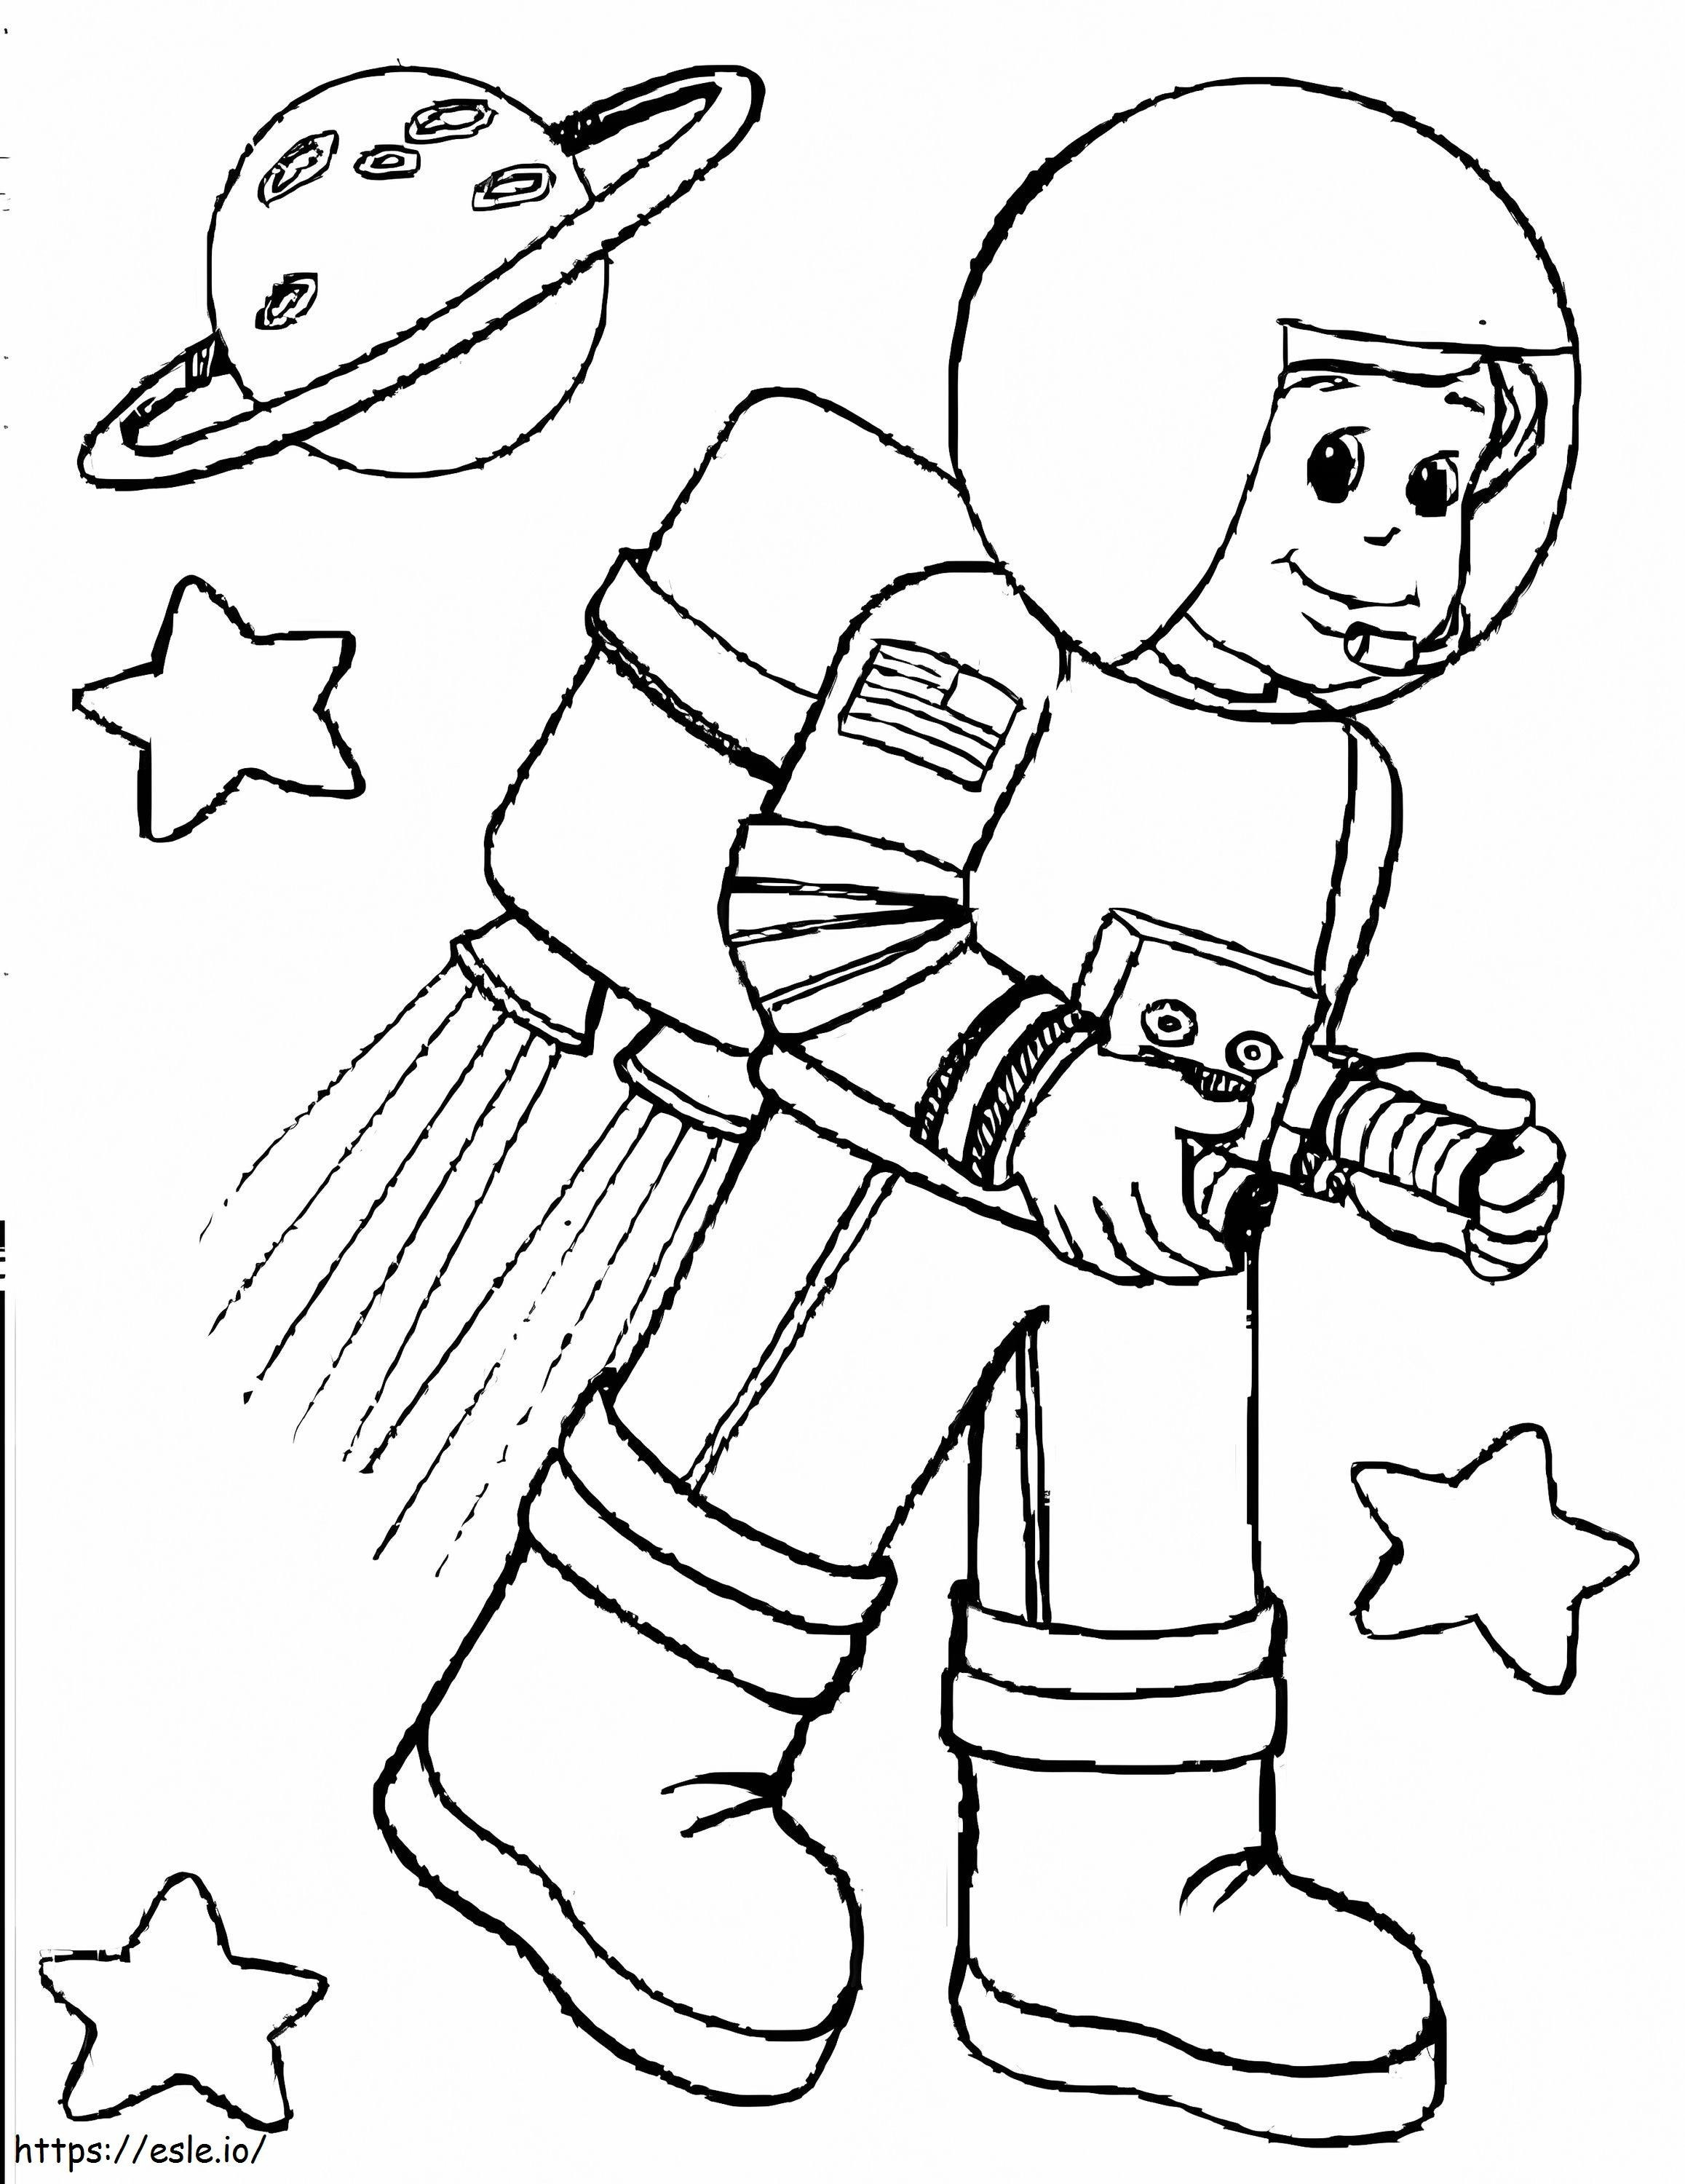 Smiling Astronaut coloring page